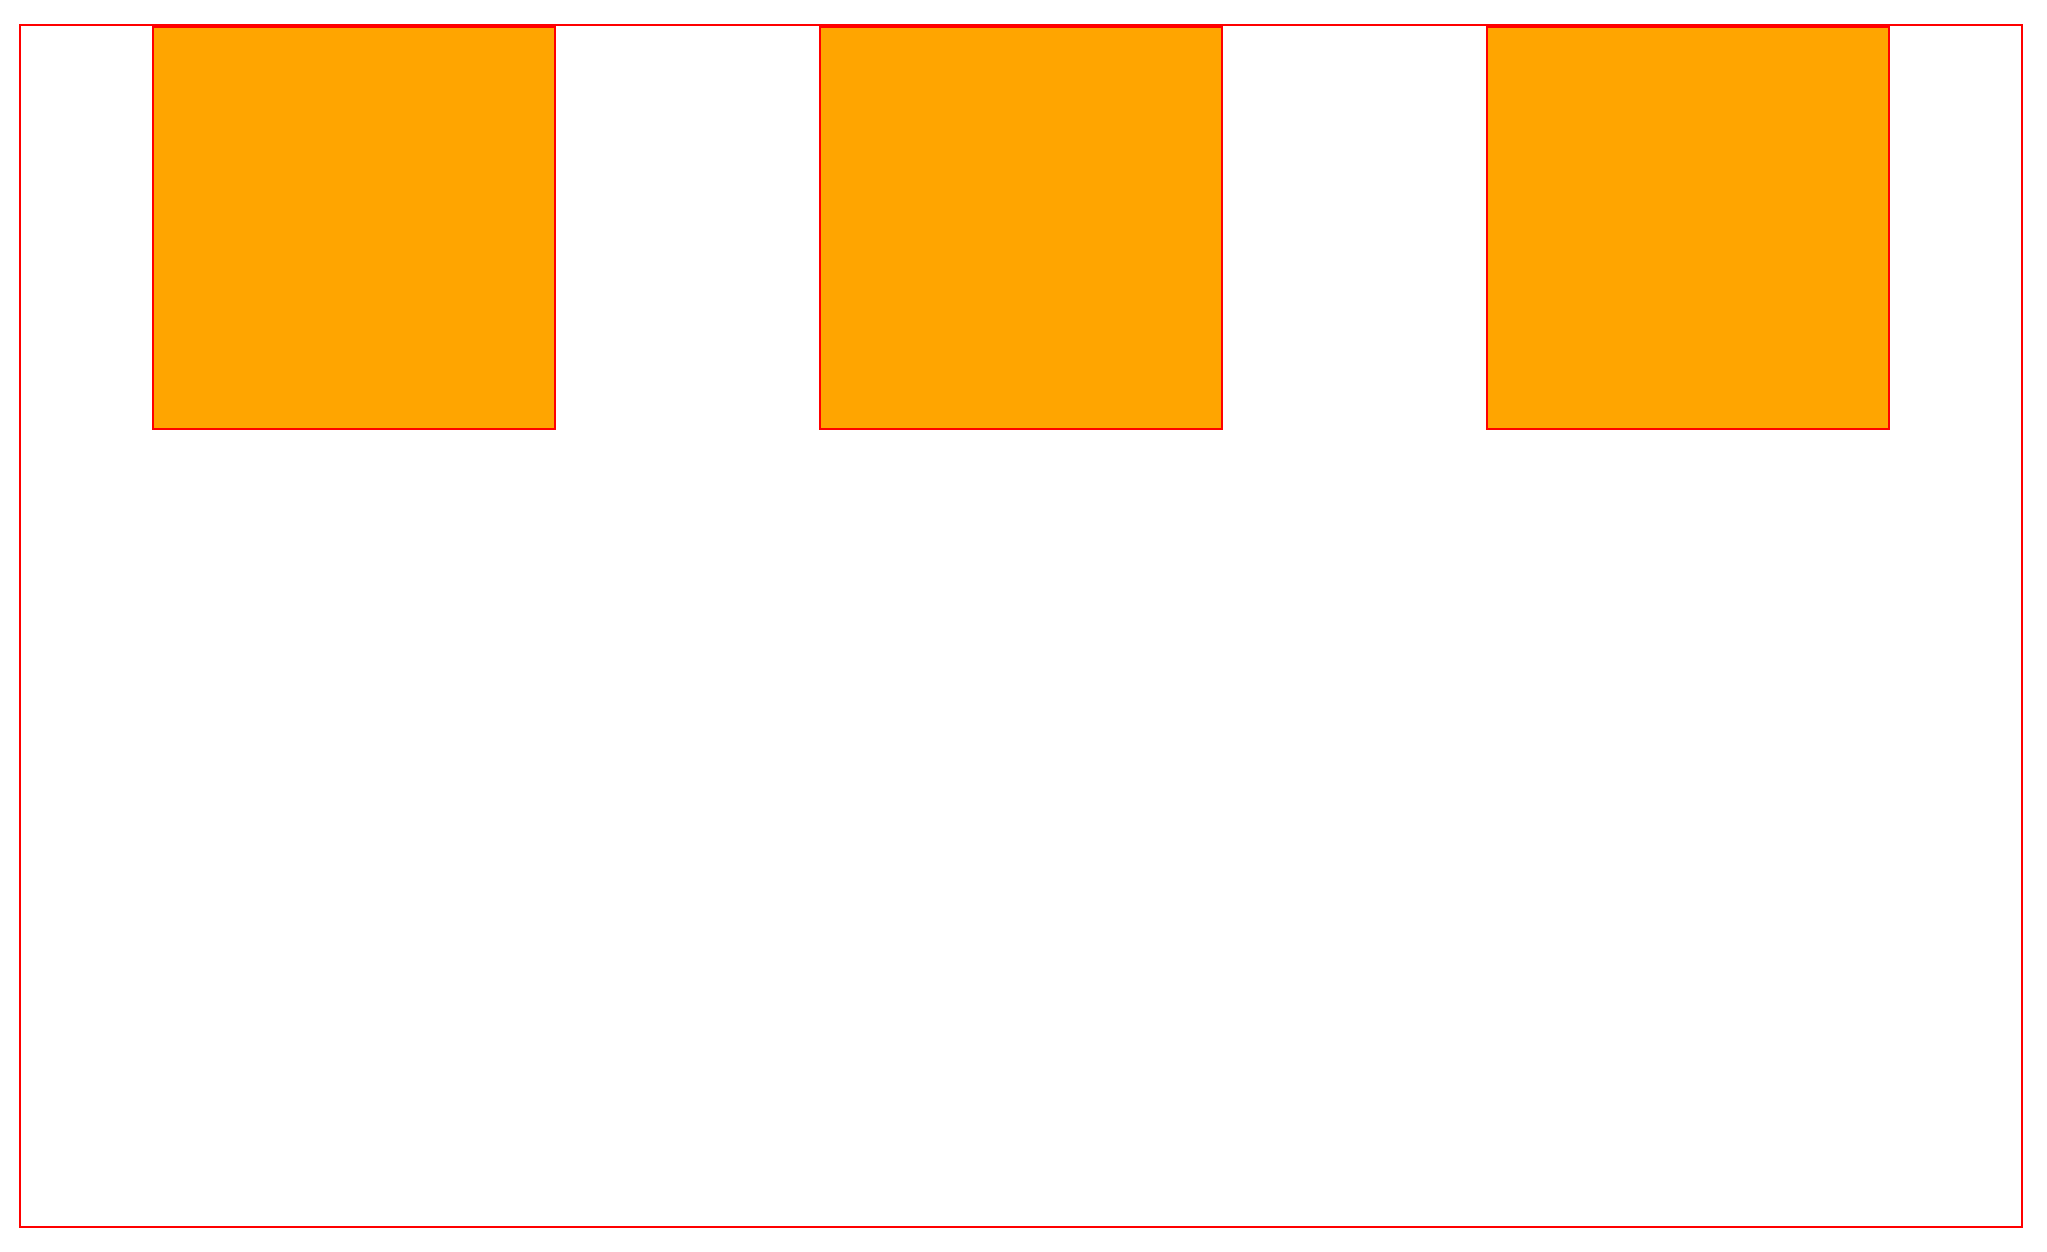 Three orange boxes in a row evenly spaced apart